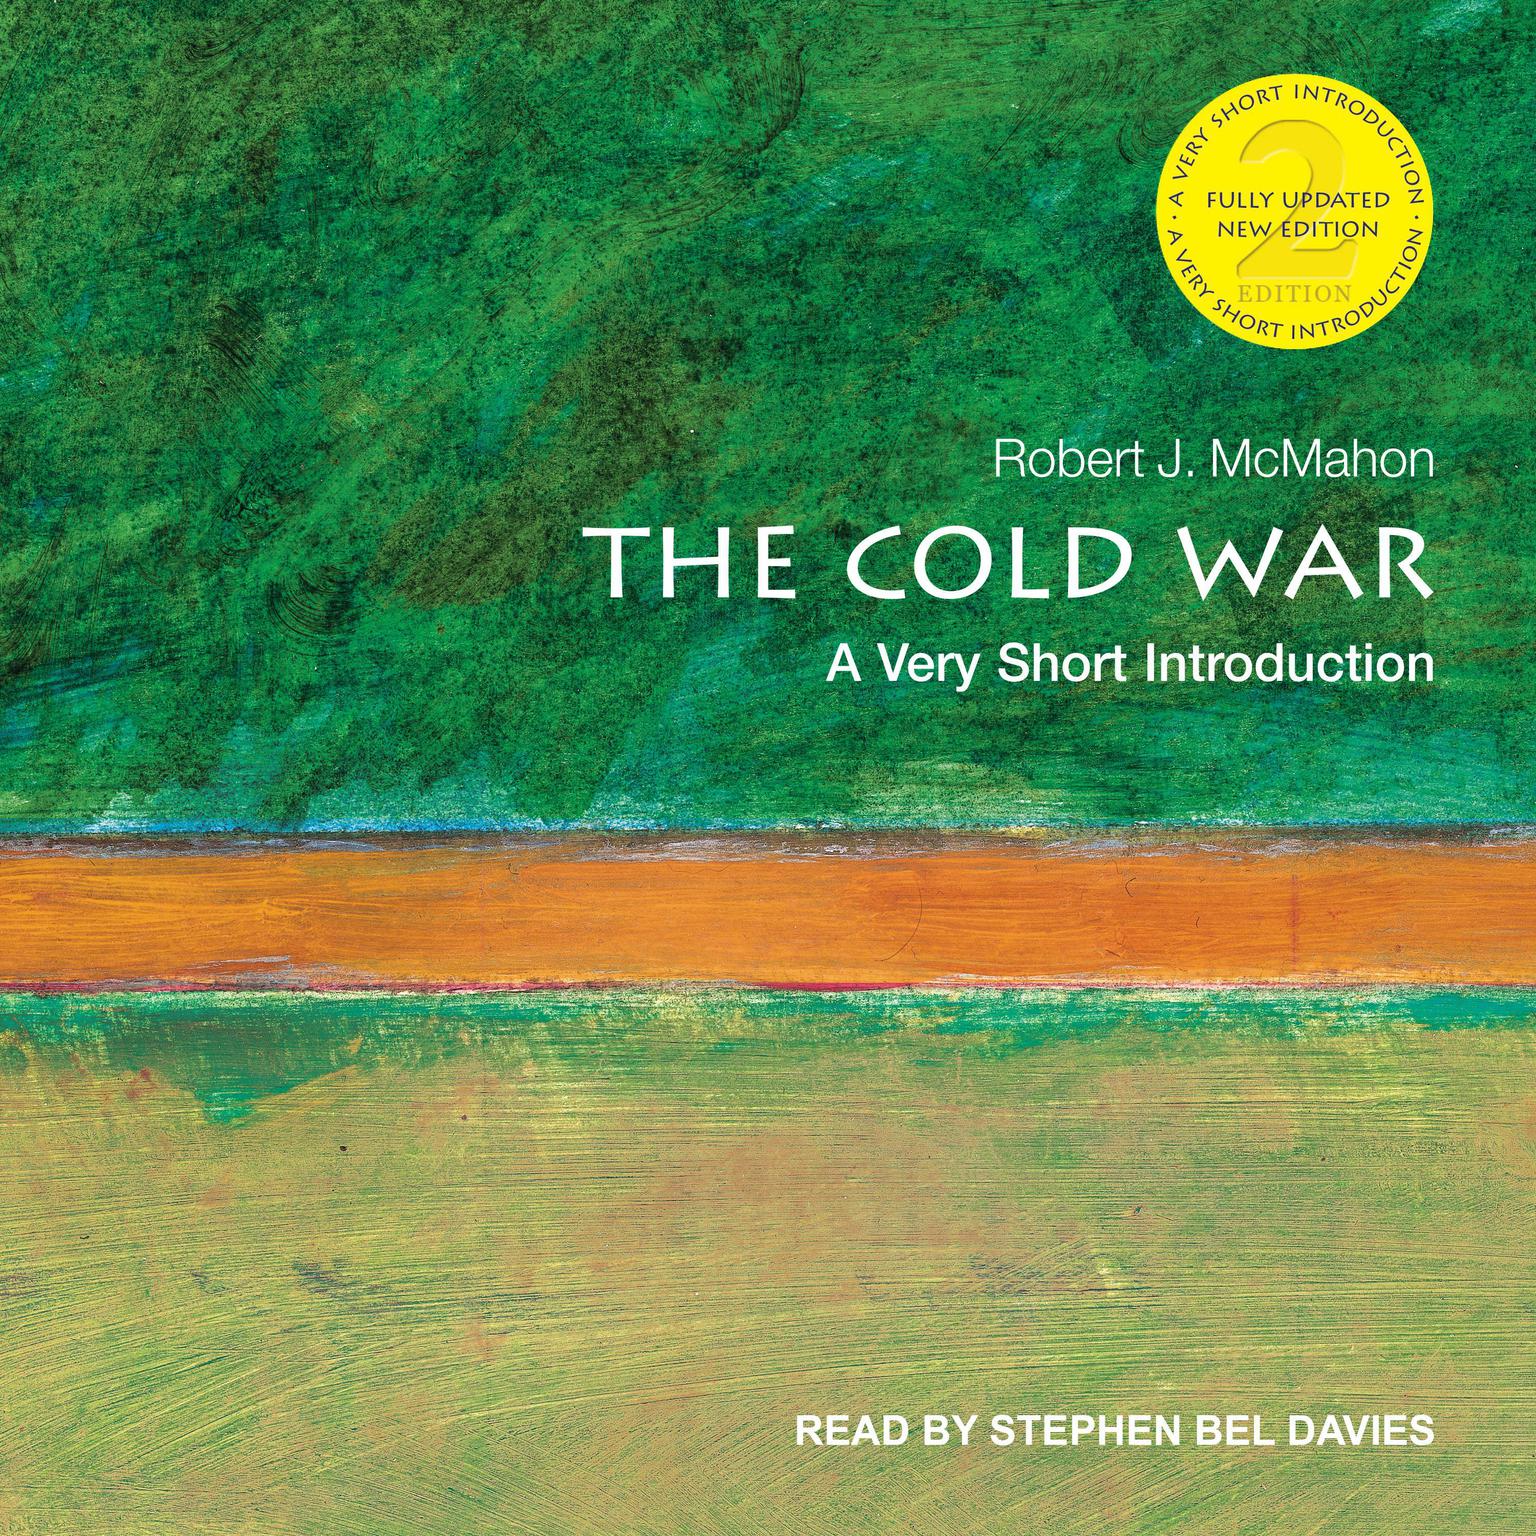 The Cold War: A Very Short Introduction (2nd Edition) Audiobook, by Robert J. McMahon